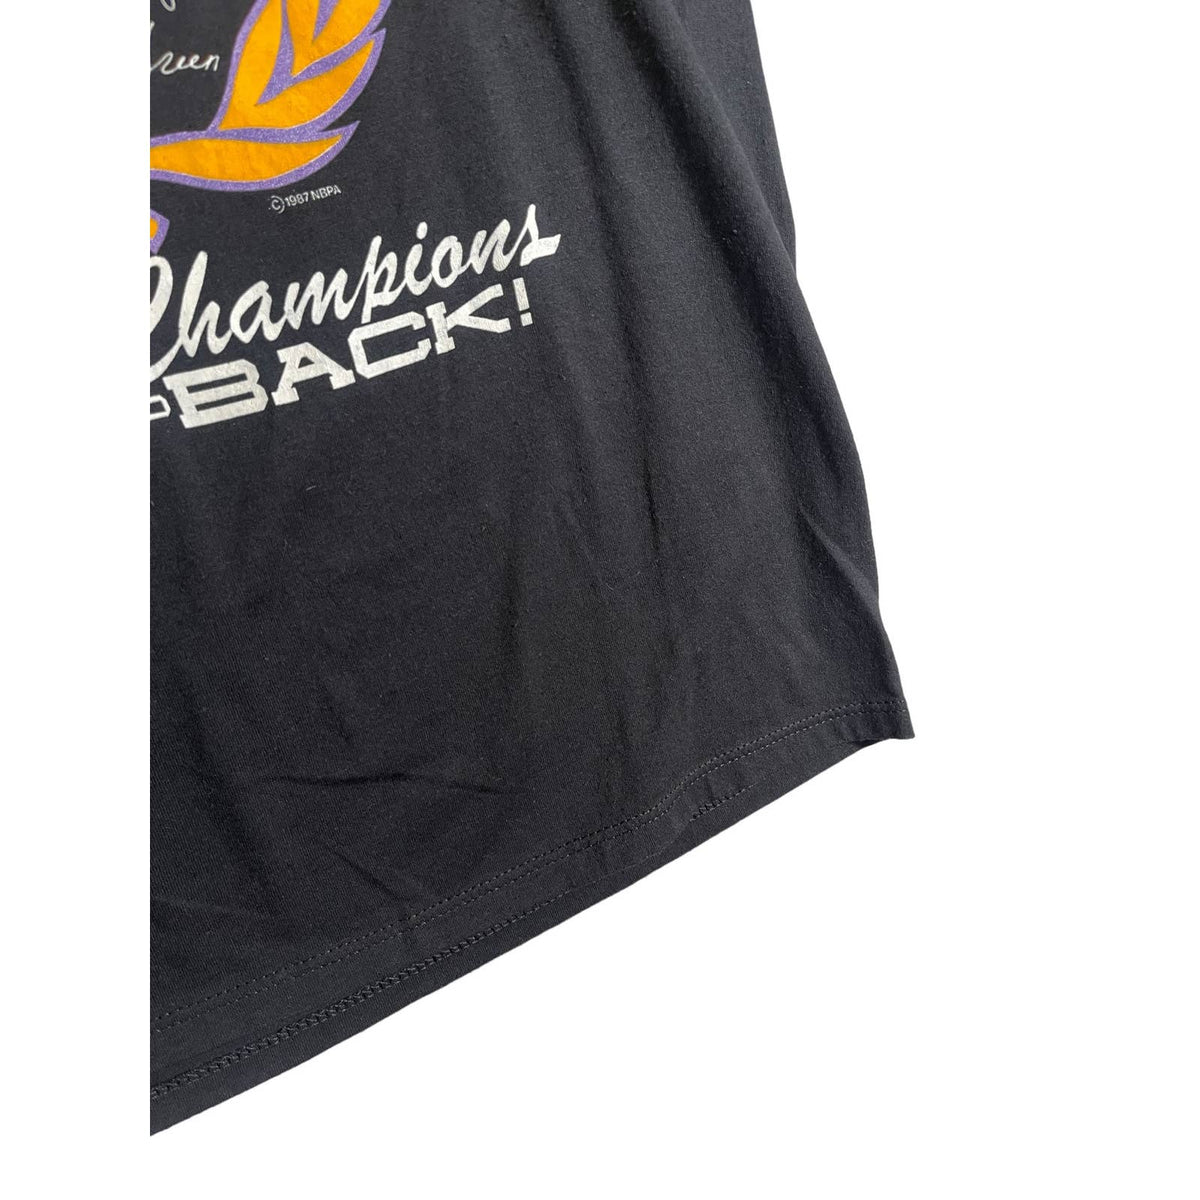 Vintage 1987 Los Angeles Lakers Back-to-Back Championship T-Shirt